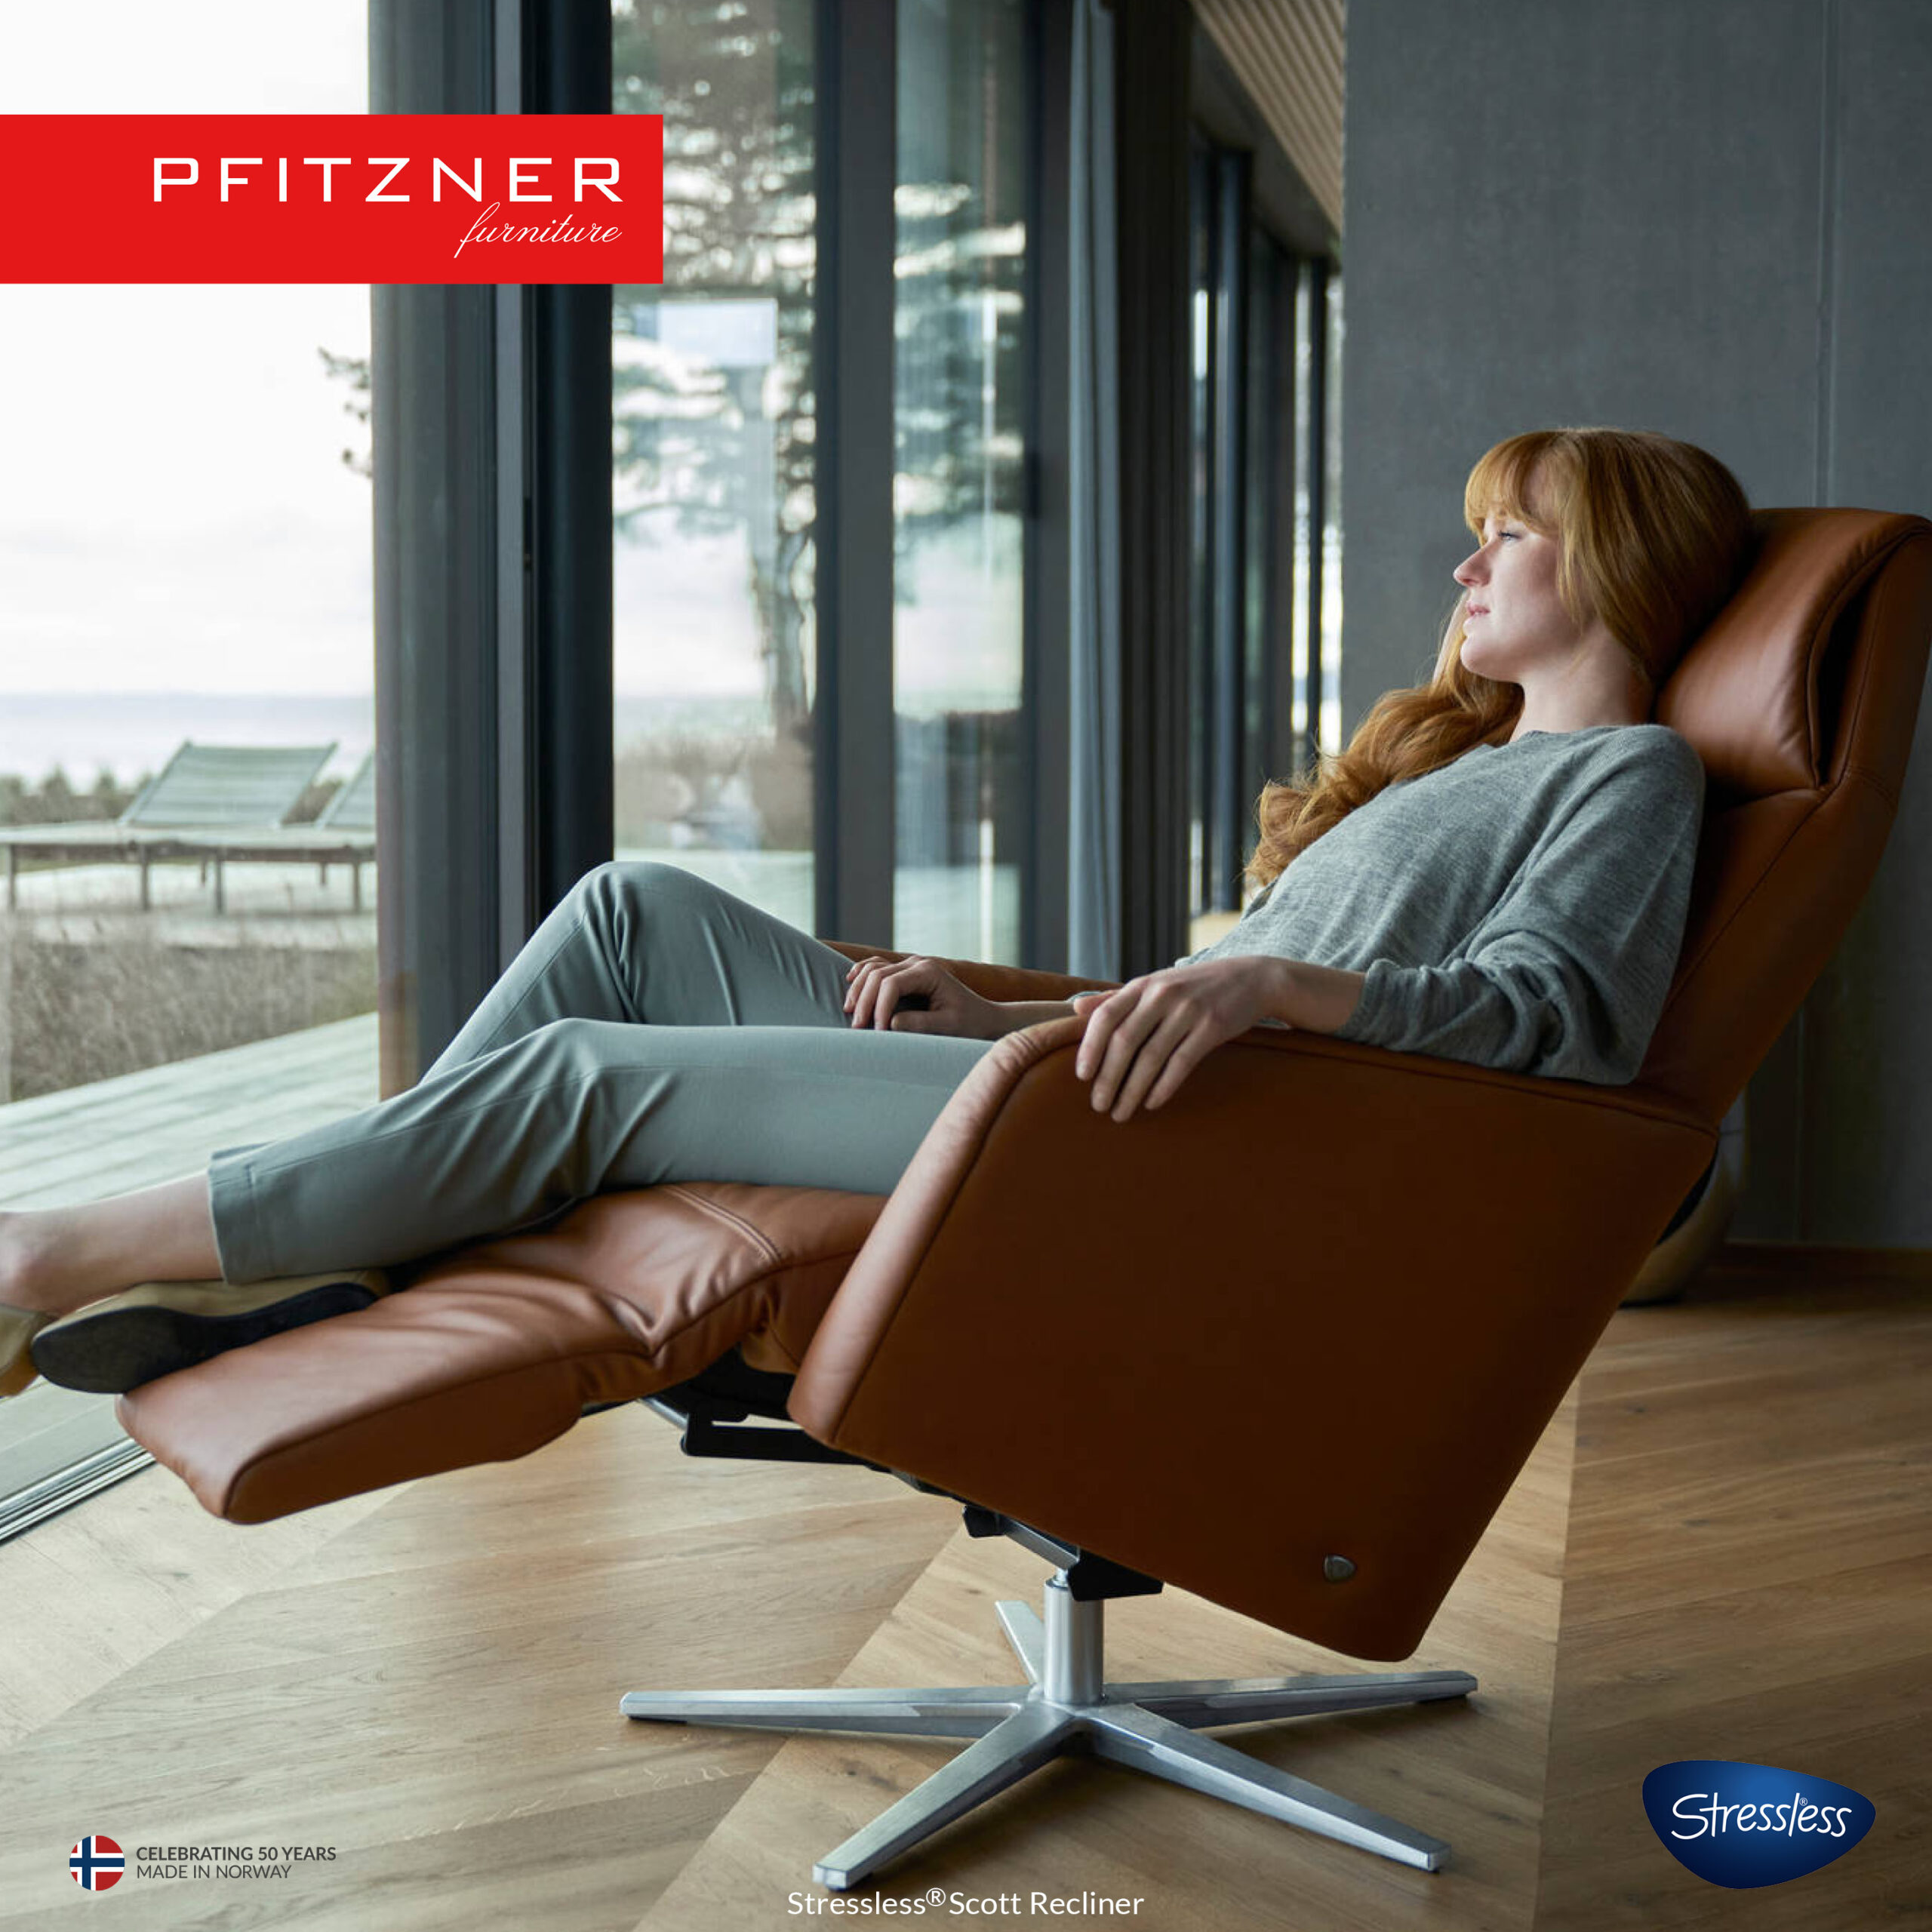 The New Range Stressless® Sam And Scott Chairs Have Arrived Pfitzner